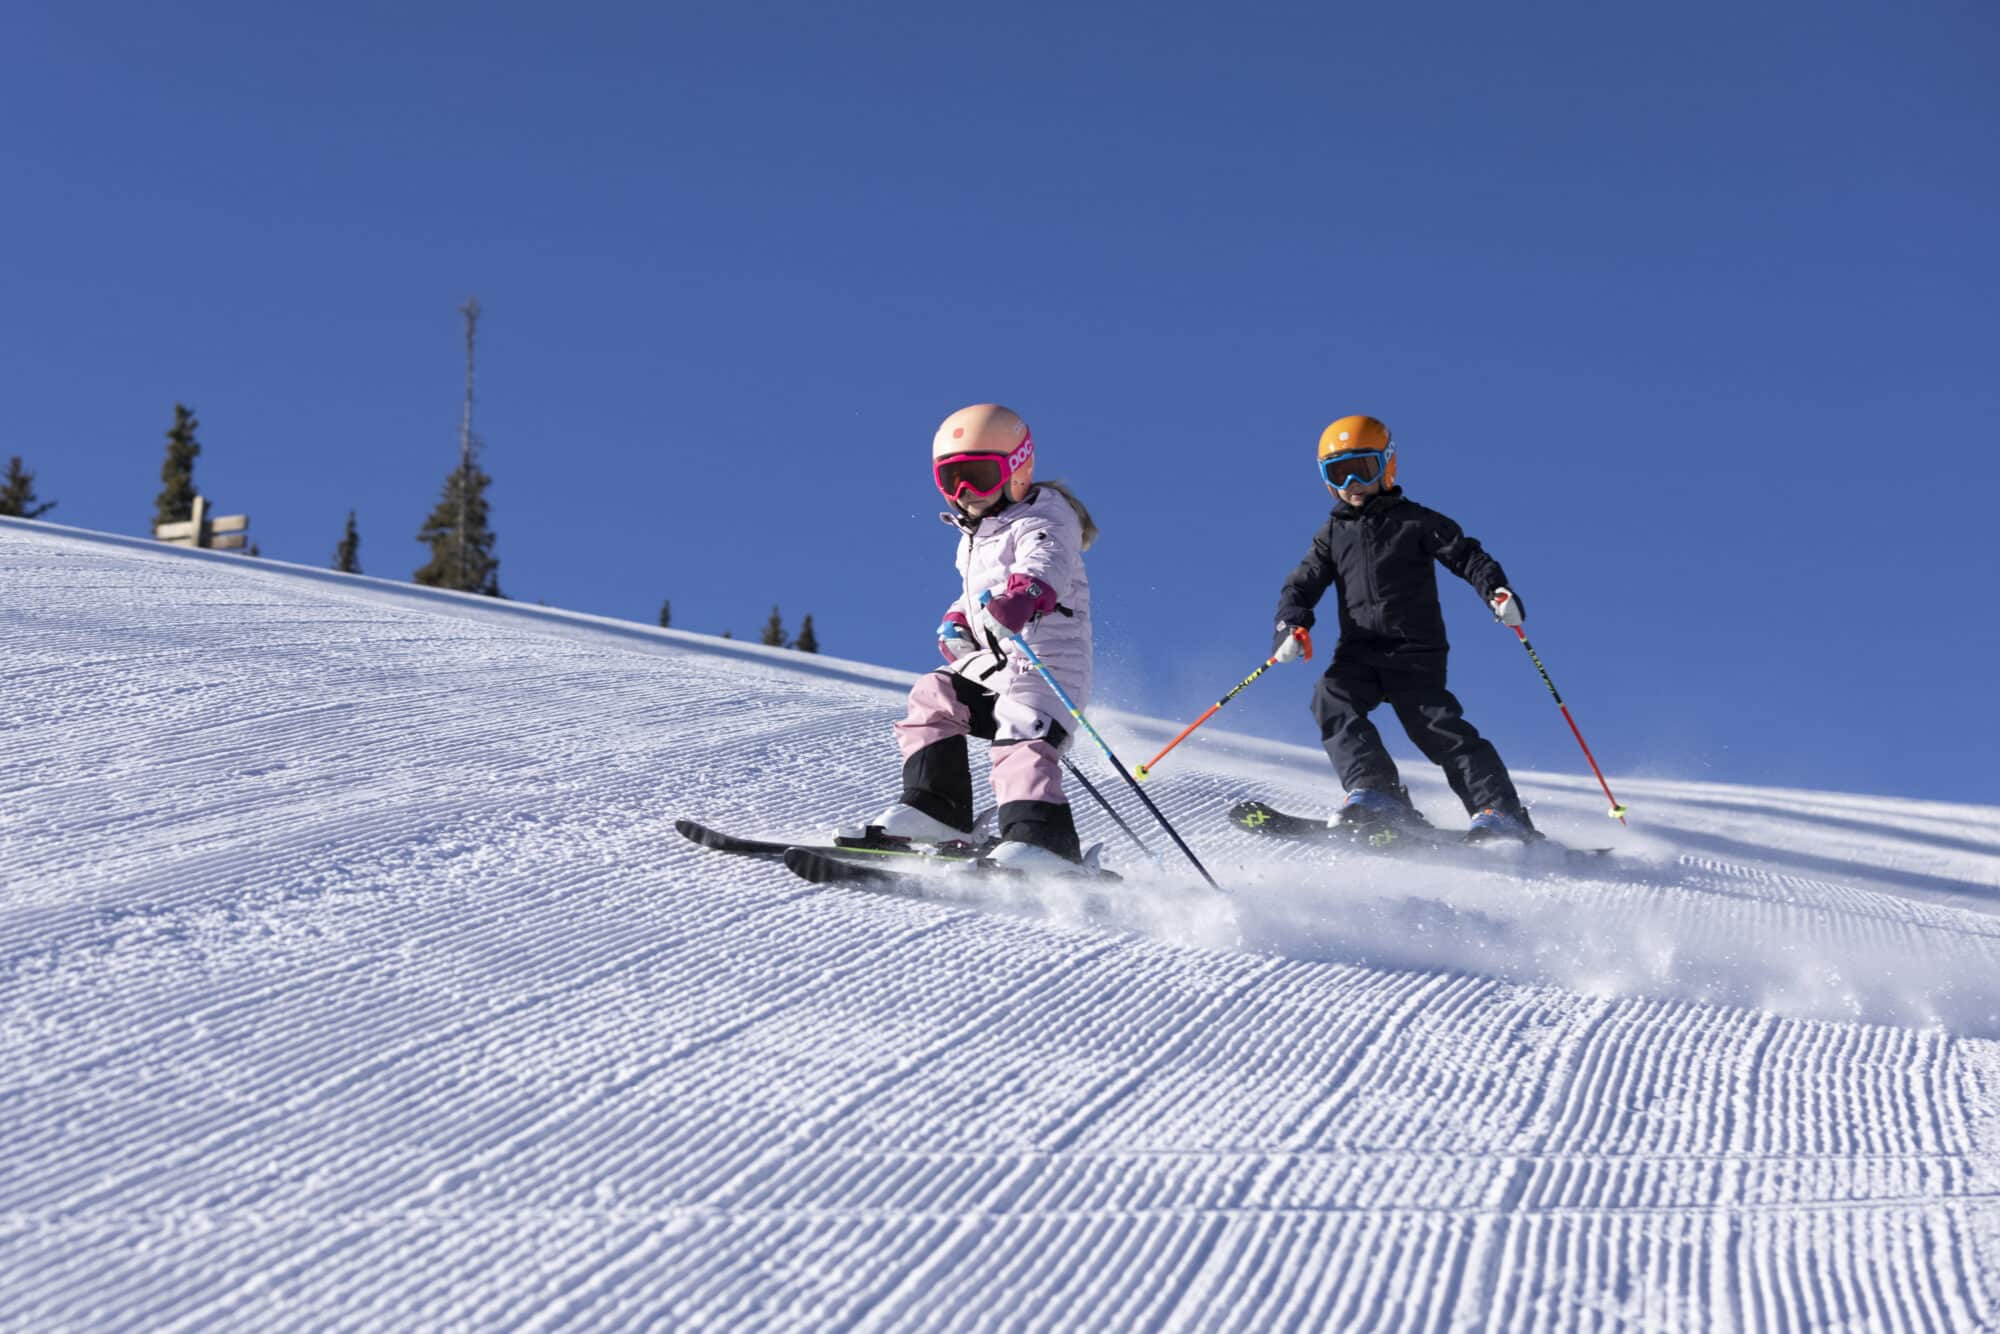 Brother and sister carve down the fresh morning corduroy